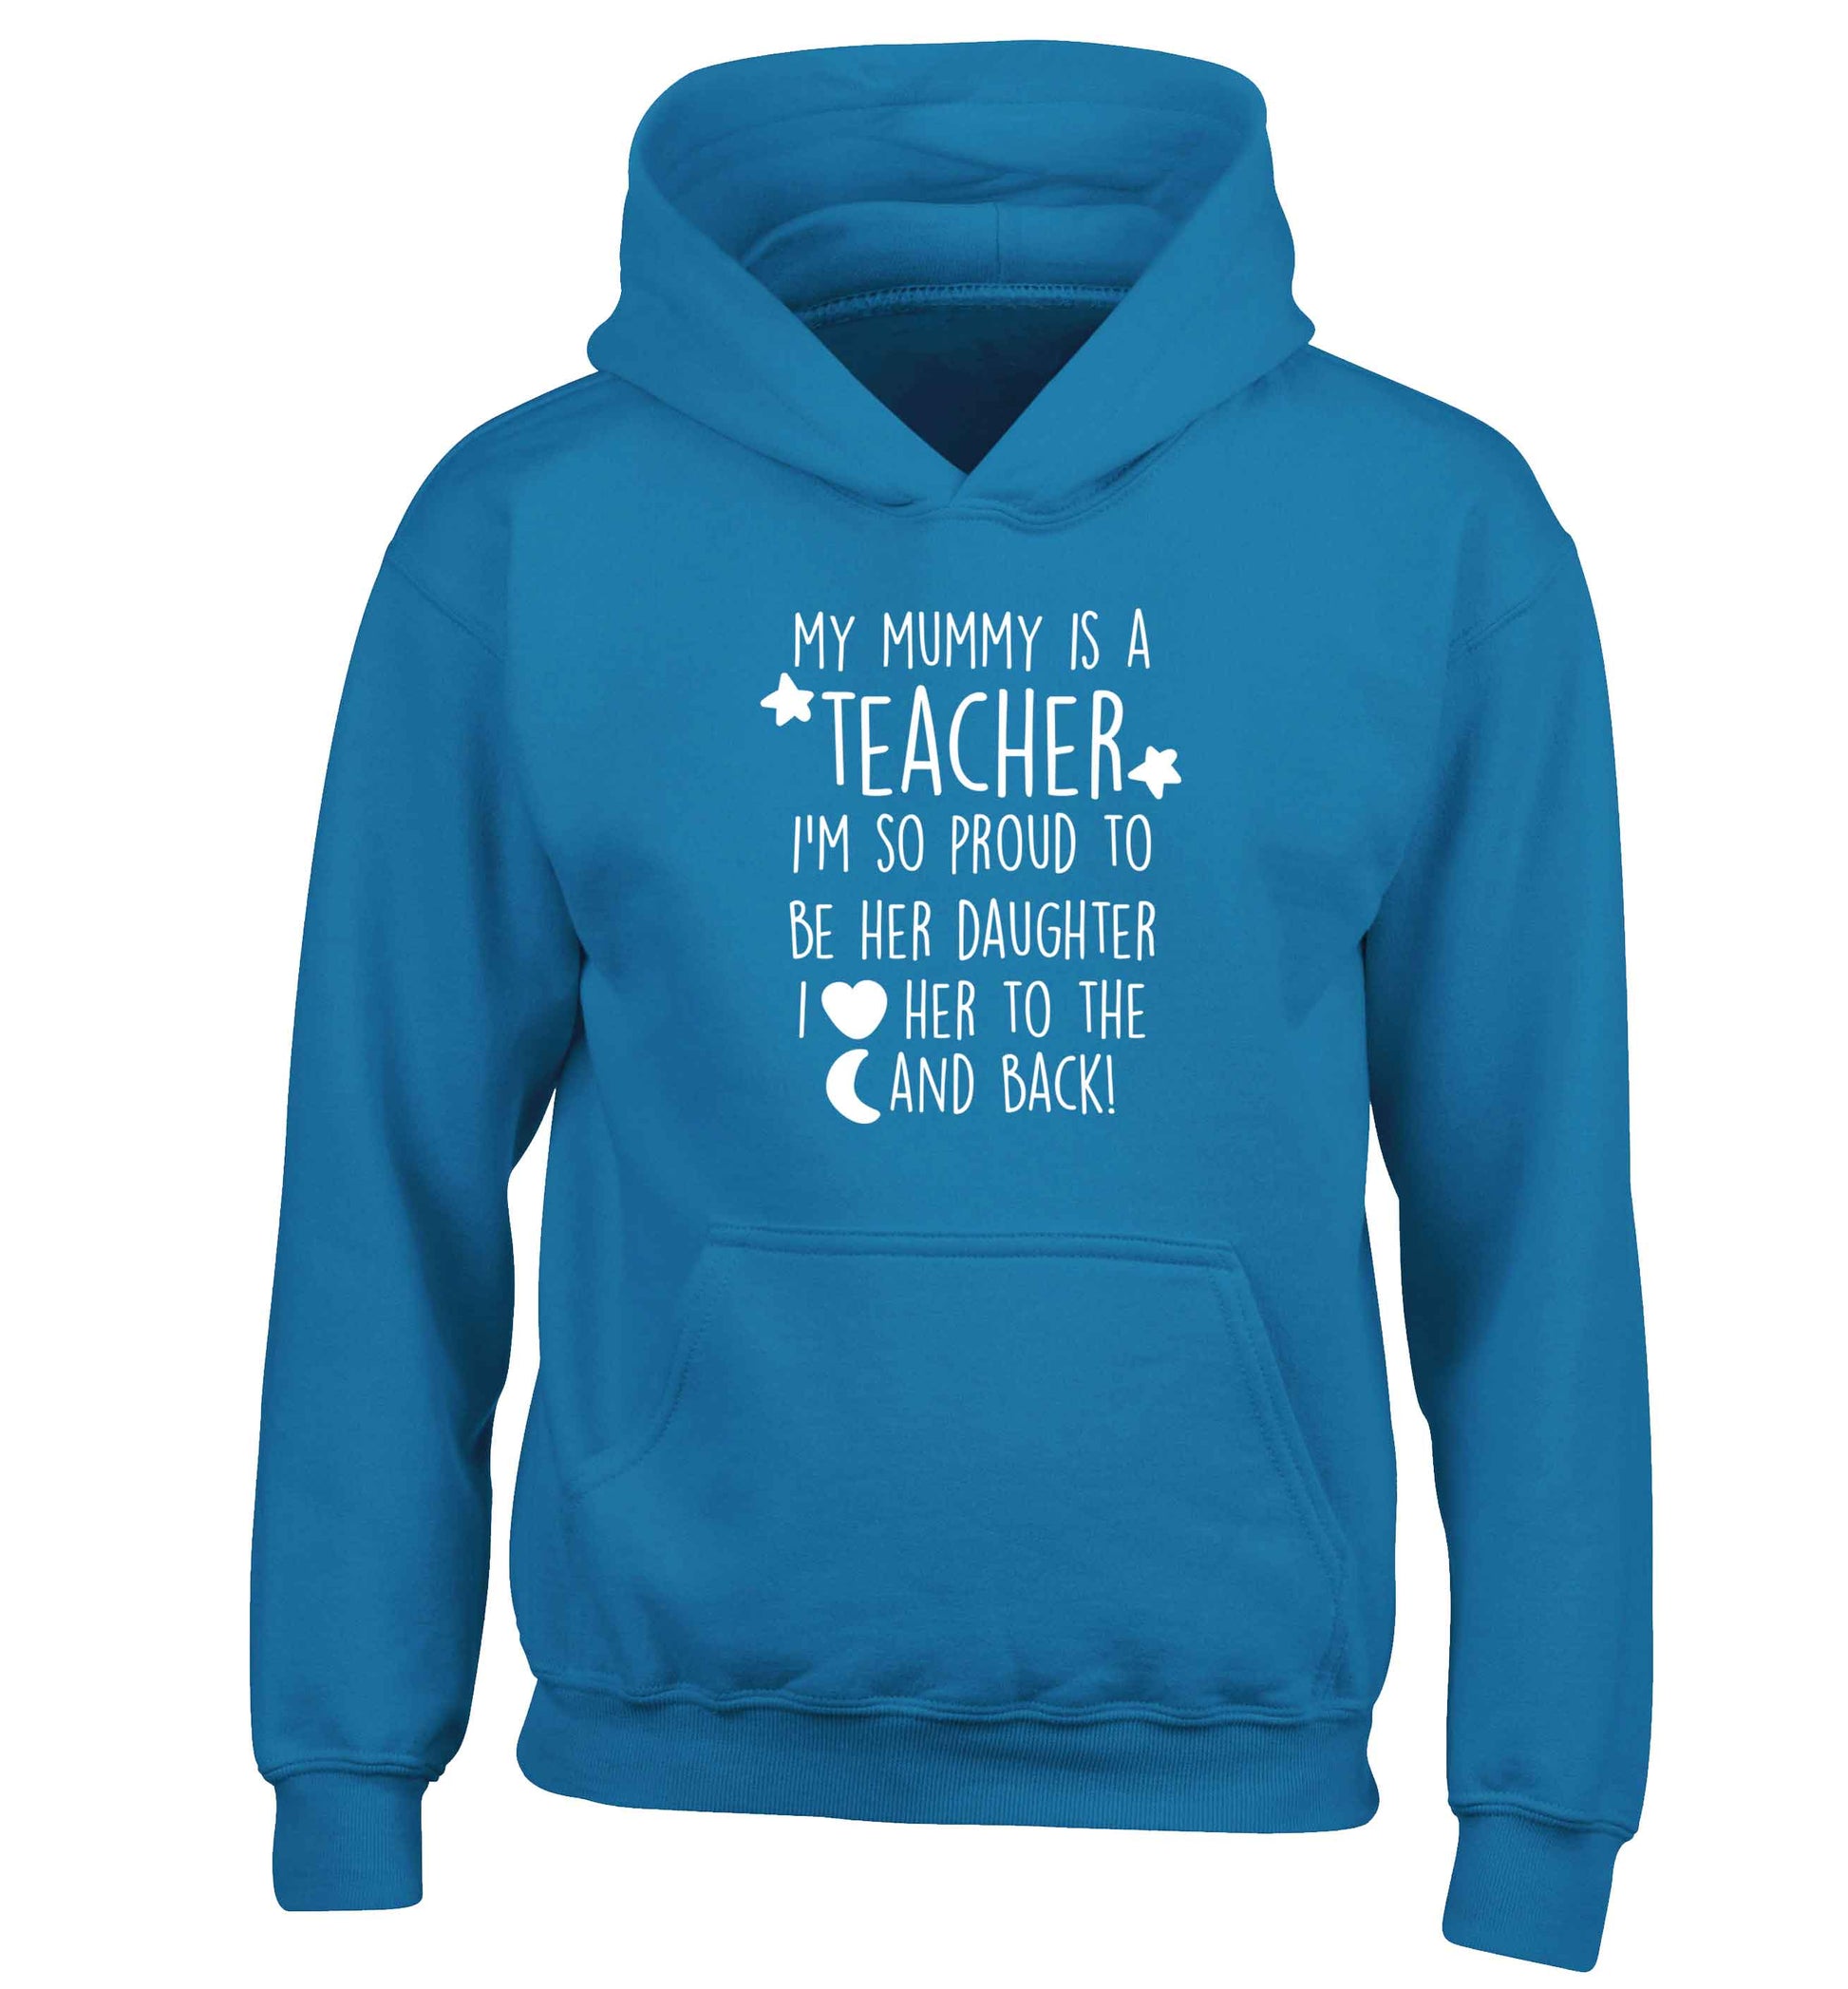 My mummy is a teacher I'm so proud to be her daughter I love her to the moon and back children's blue hoodie 12-13 Years